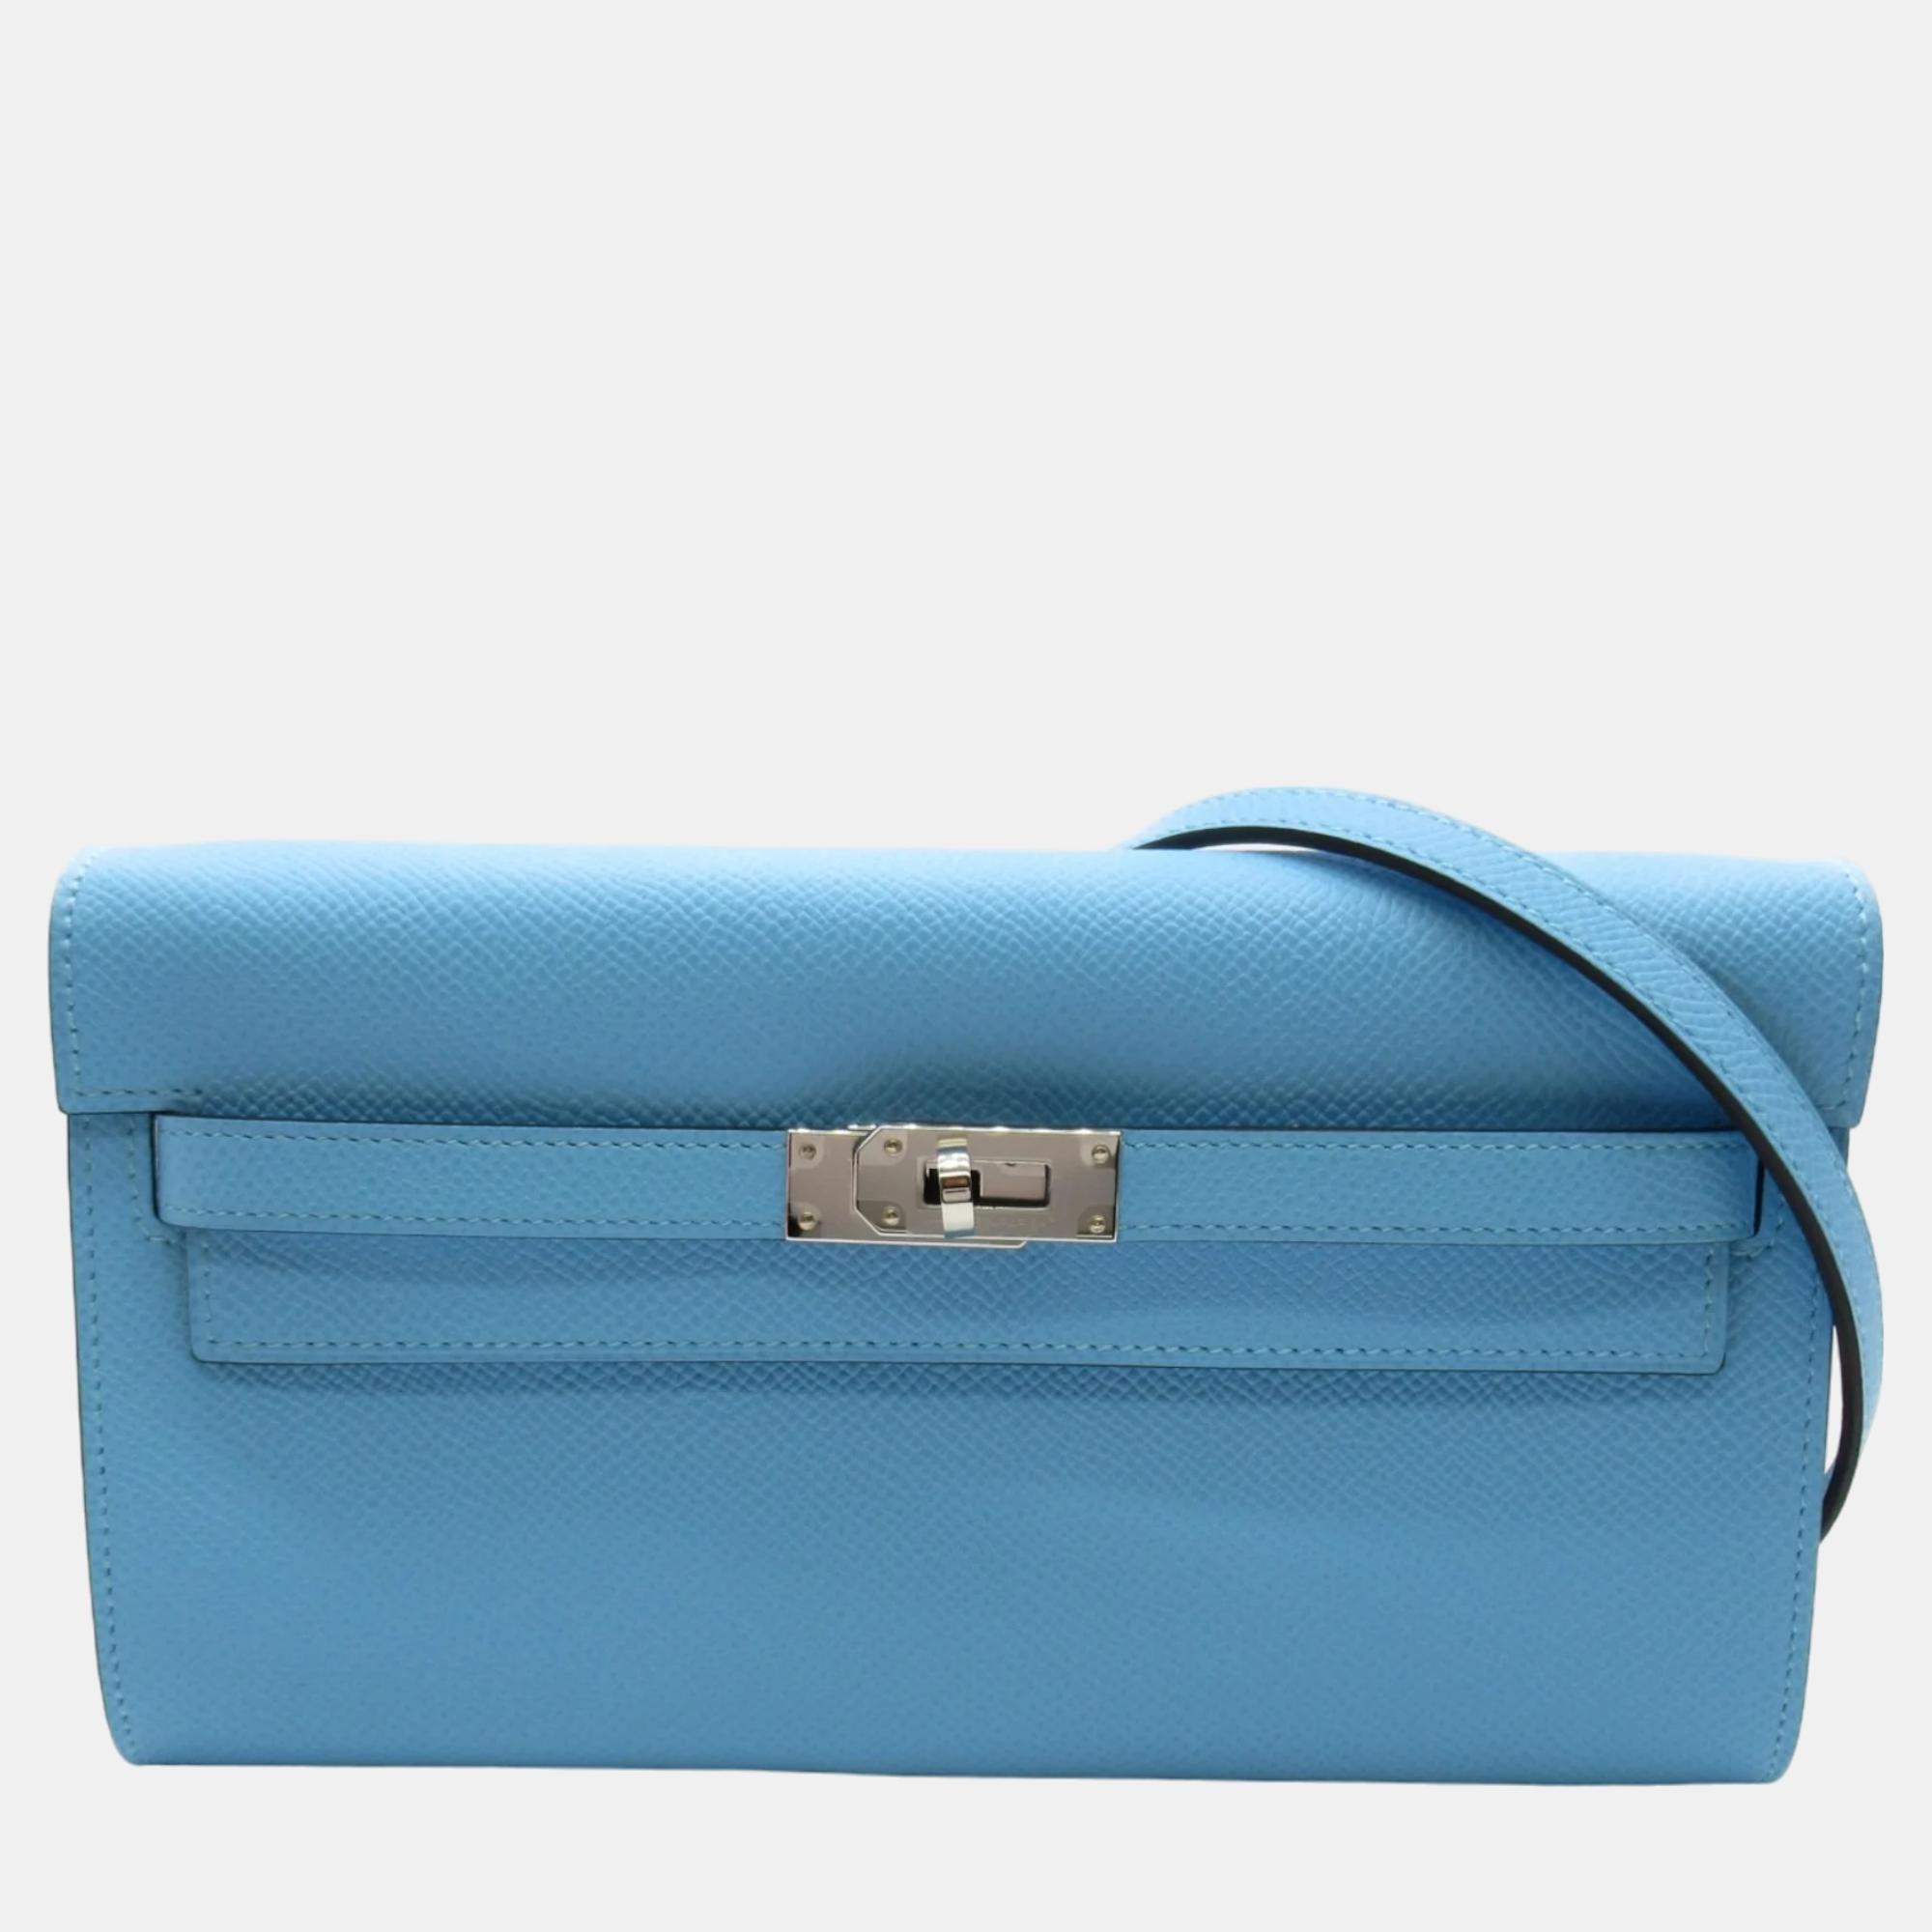 Hermes blue epsom leather kelly to go wallet